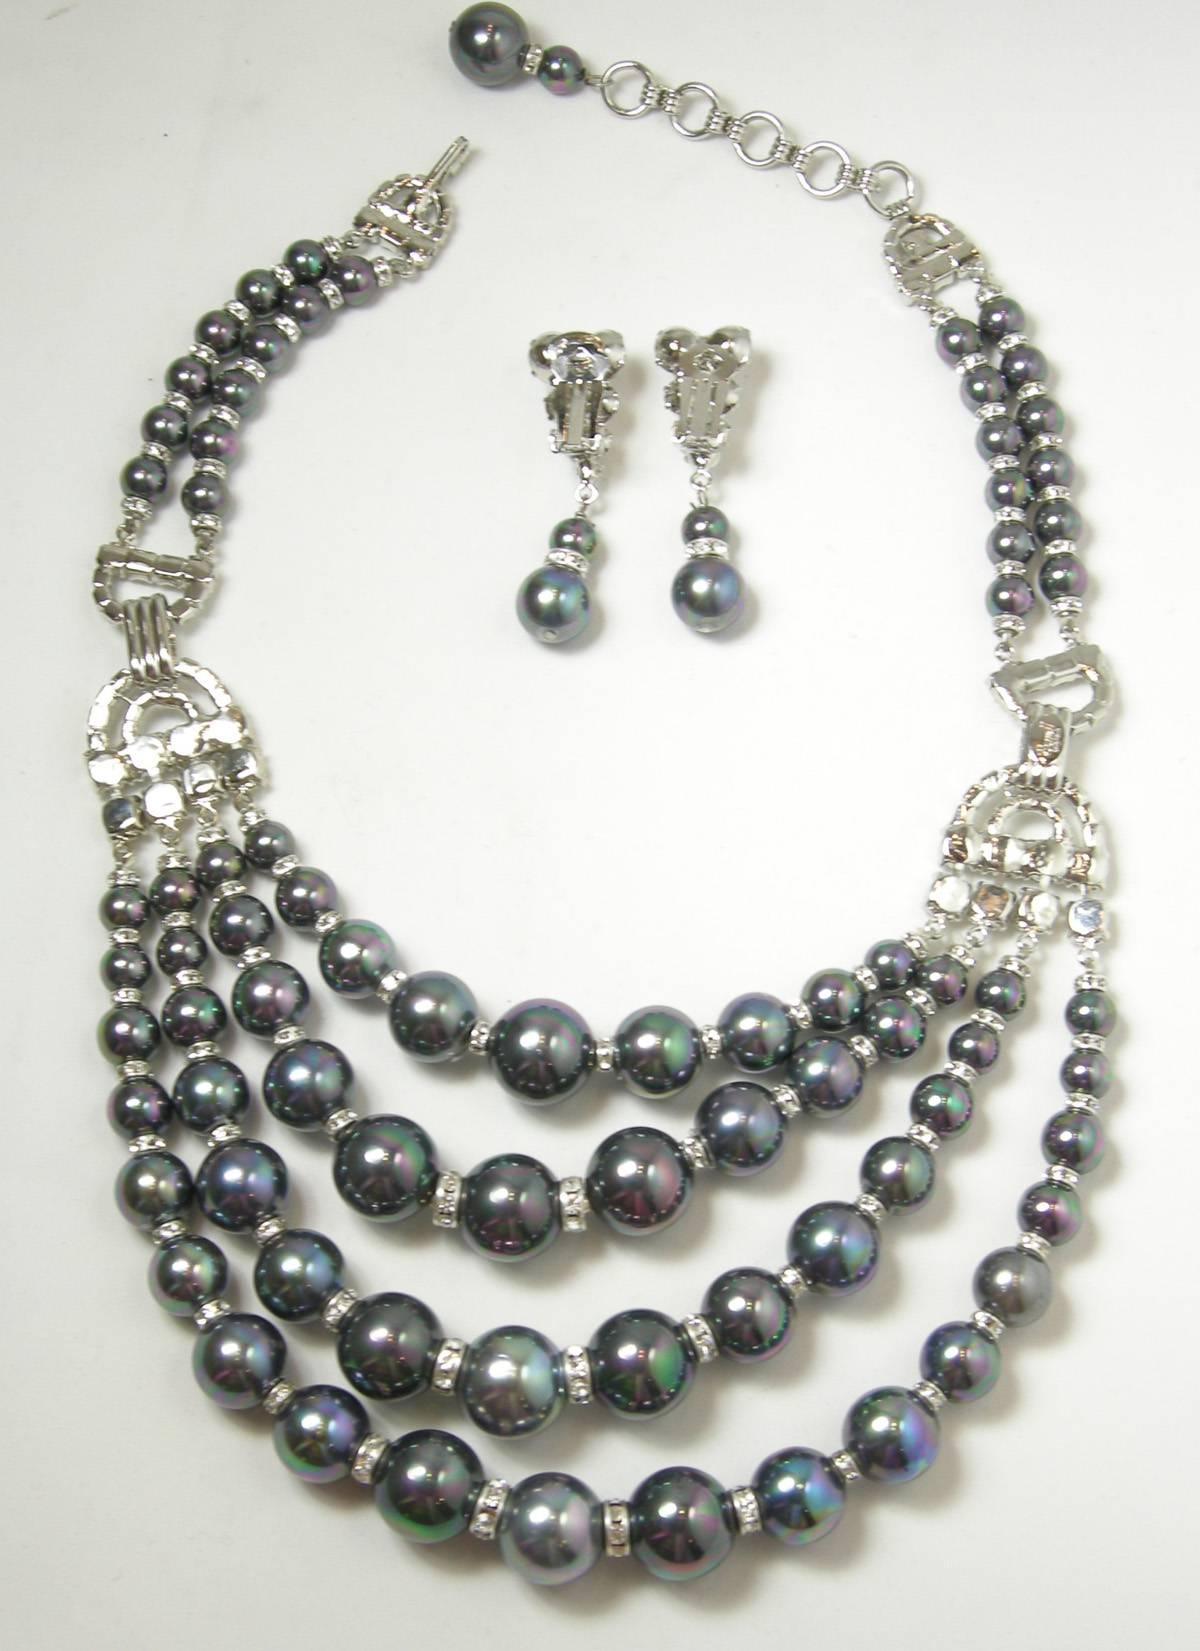 This is a one-of-a-kind Robert Sorrell creation.  It is a bib necklace made with faux Tahitian pearls and crystals in a rhodium silver tone finish.  There are four rows of the Tahitian pearls that graduate in size with crystals in-between.  The